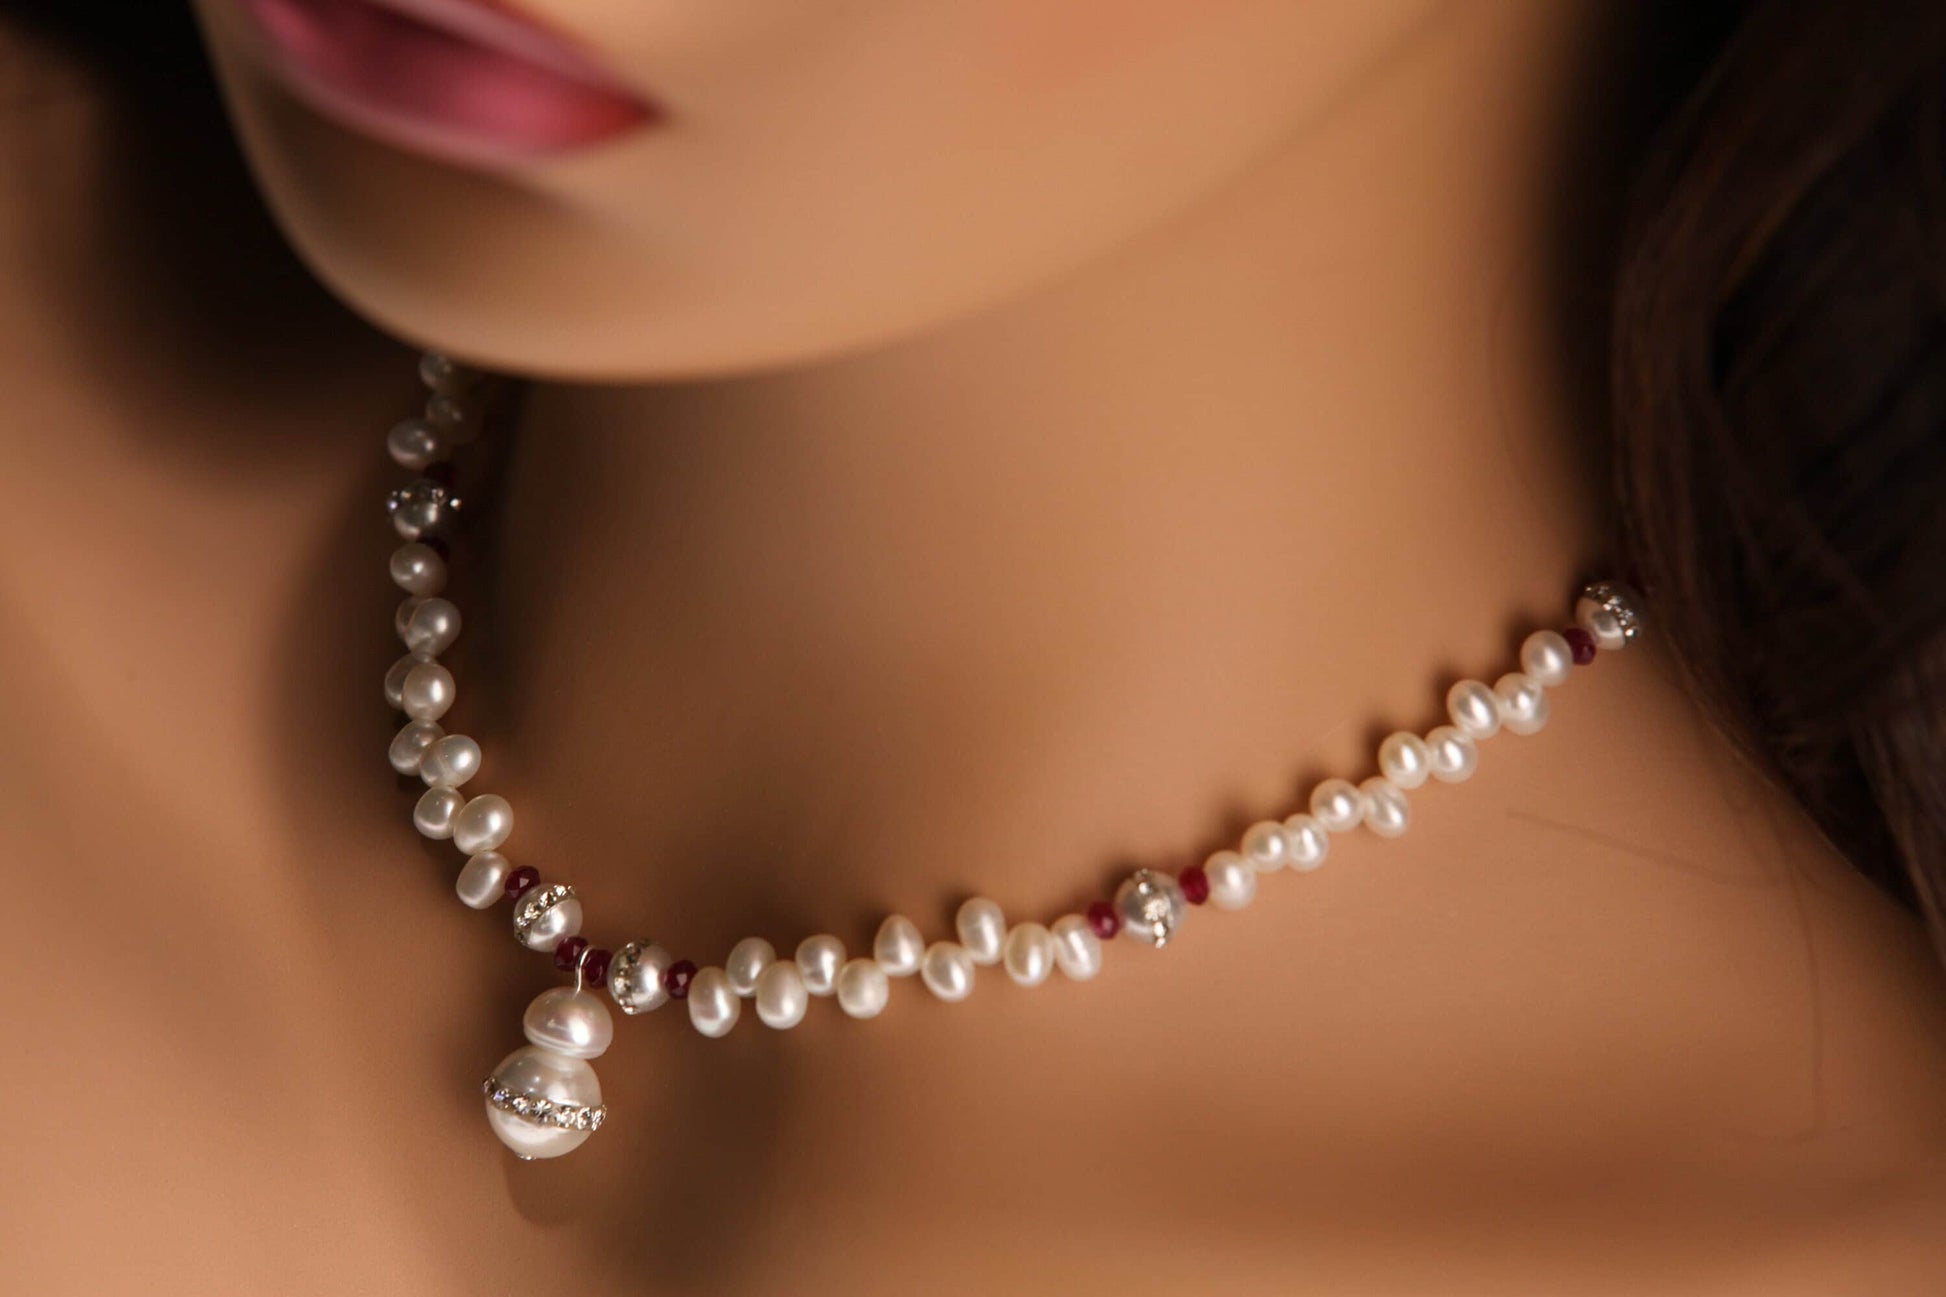 Natural Freshwater Pearl 4x6mm Potato Top Drilled Pearl, Spacer with Garnet, Rhinestone Pearl 6mm and Pendant 10mm,Silver Necklace, Bridal